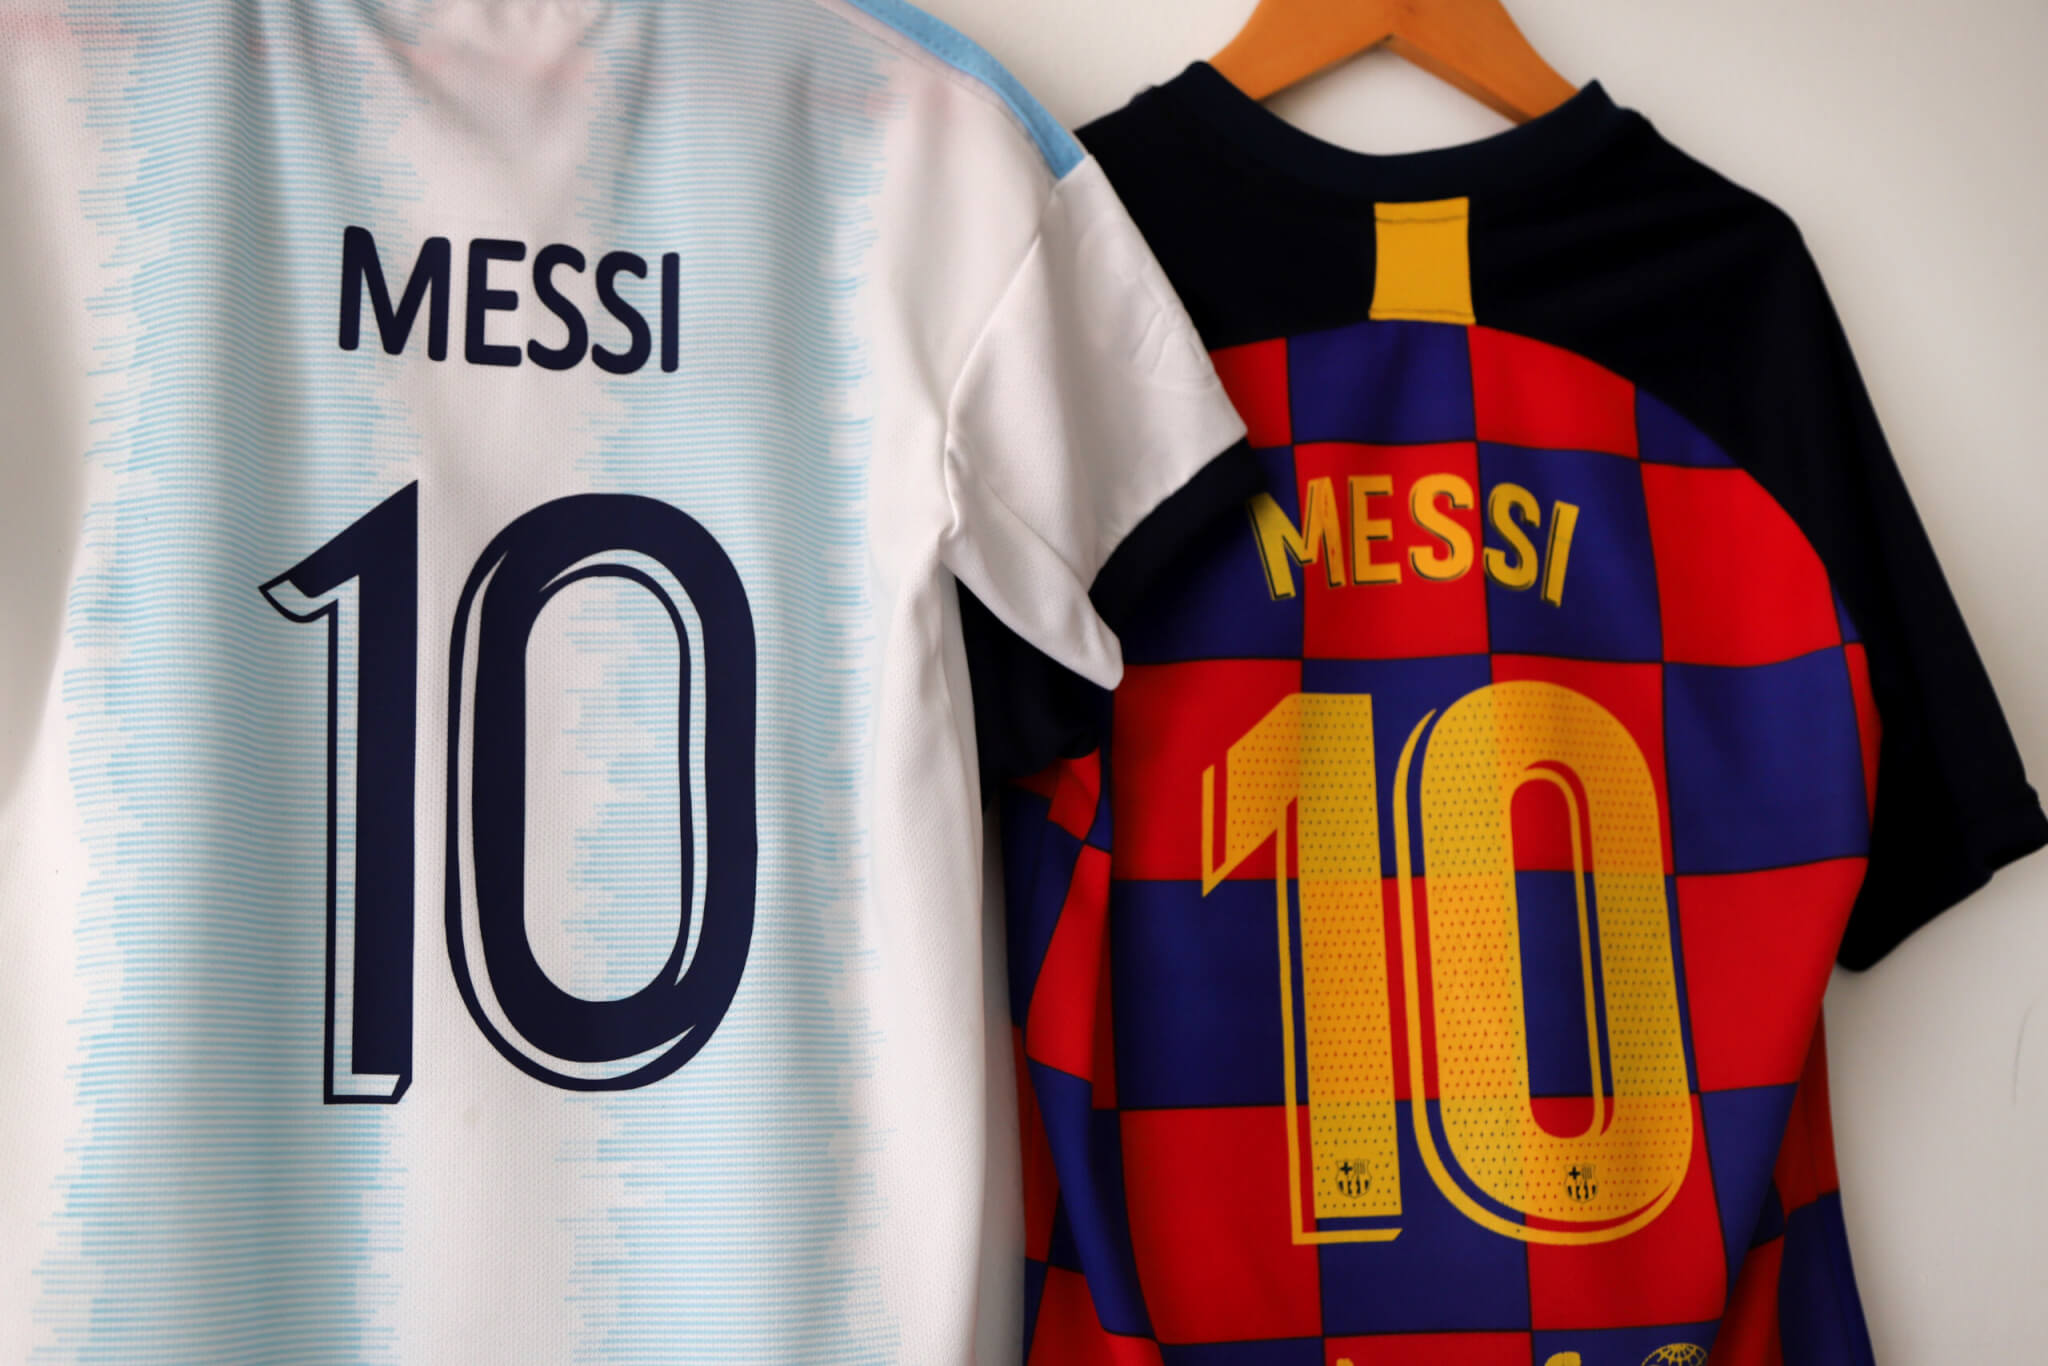 Argentina football shirt of Lionel Messi, along with Messi's Barcelona shirt.